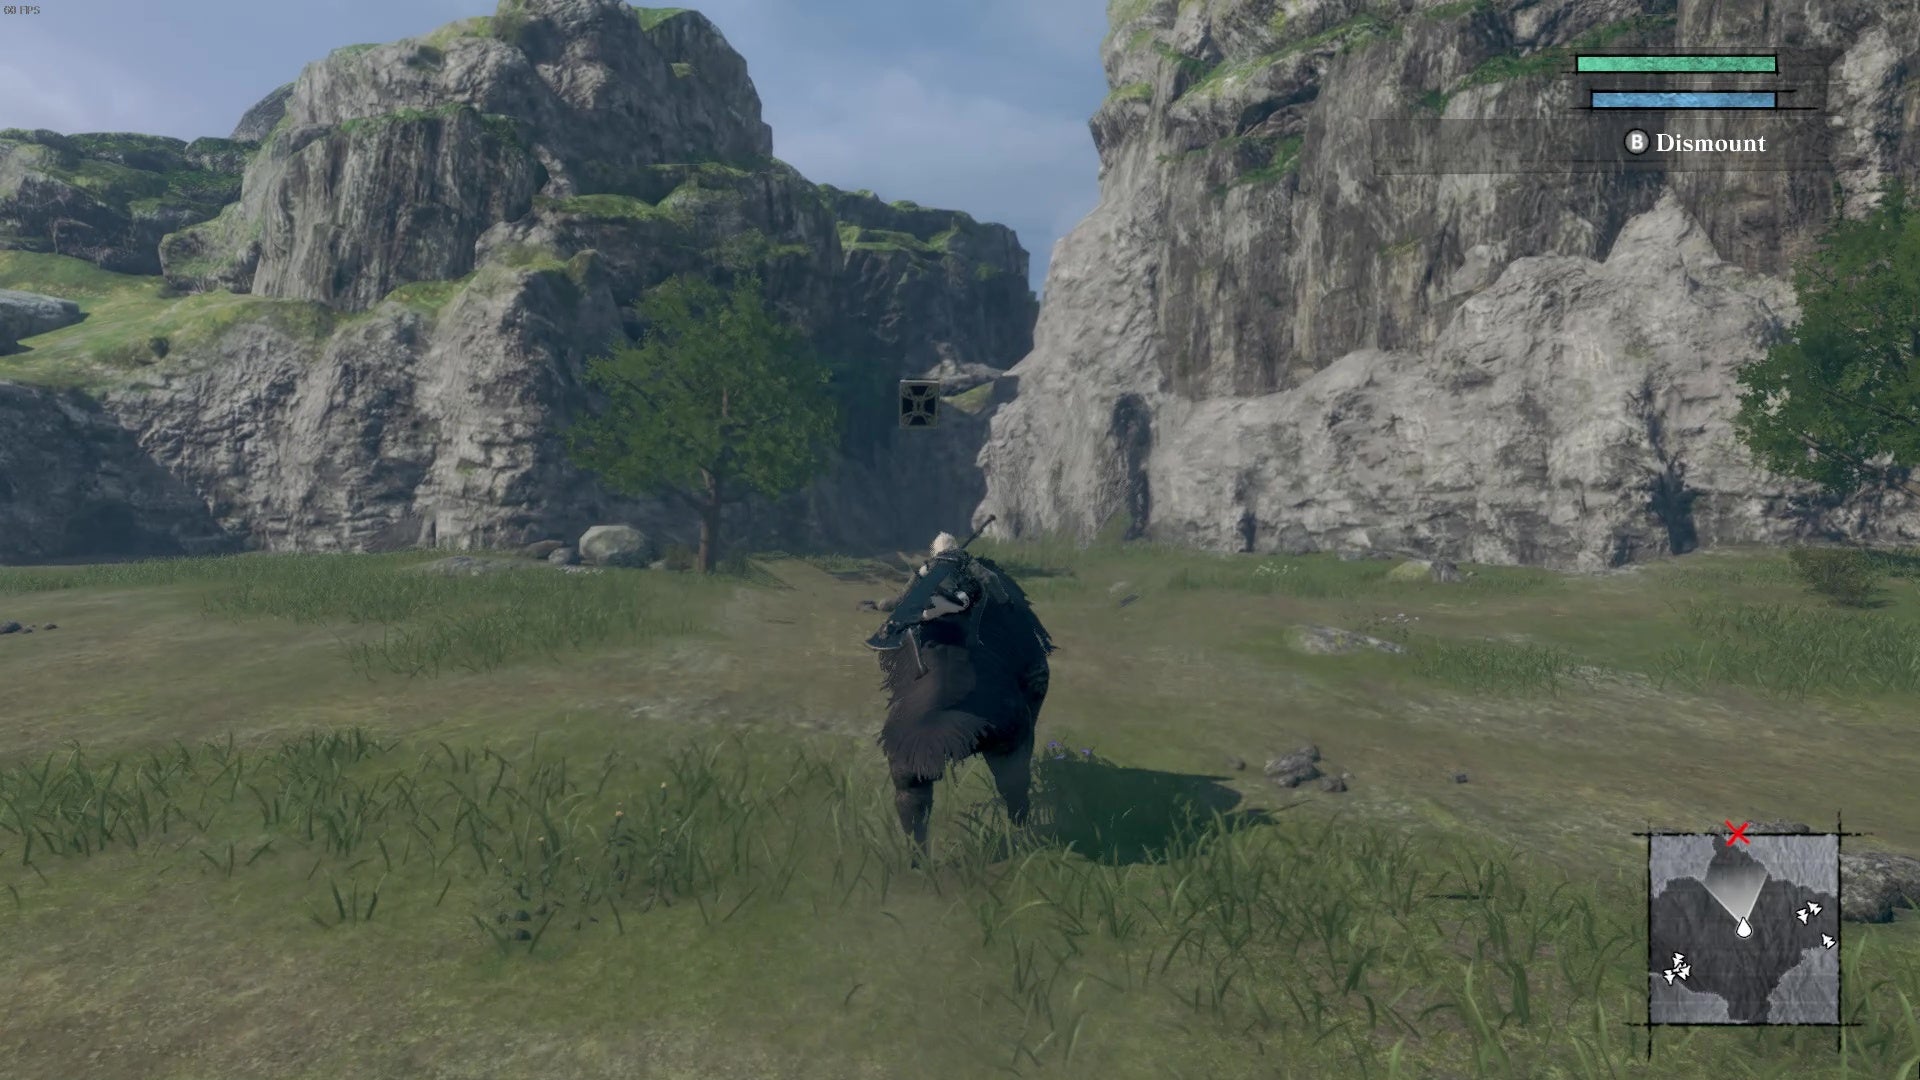 A screenshot of NieR Replicant which shows me riding on a huge boar through a lush, green field.